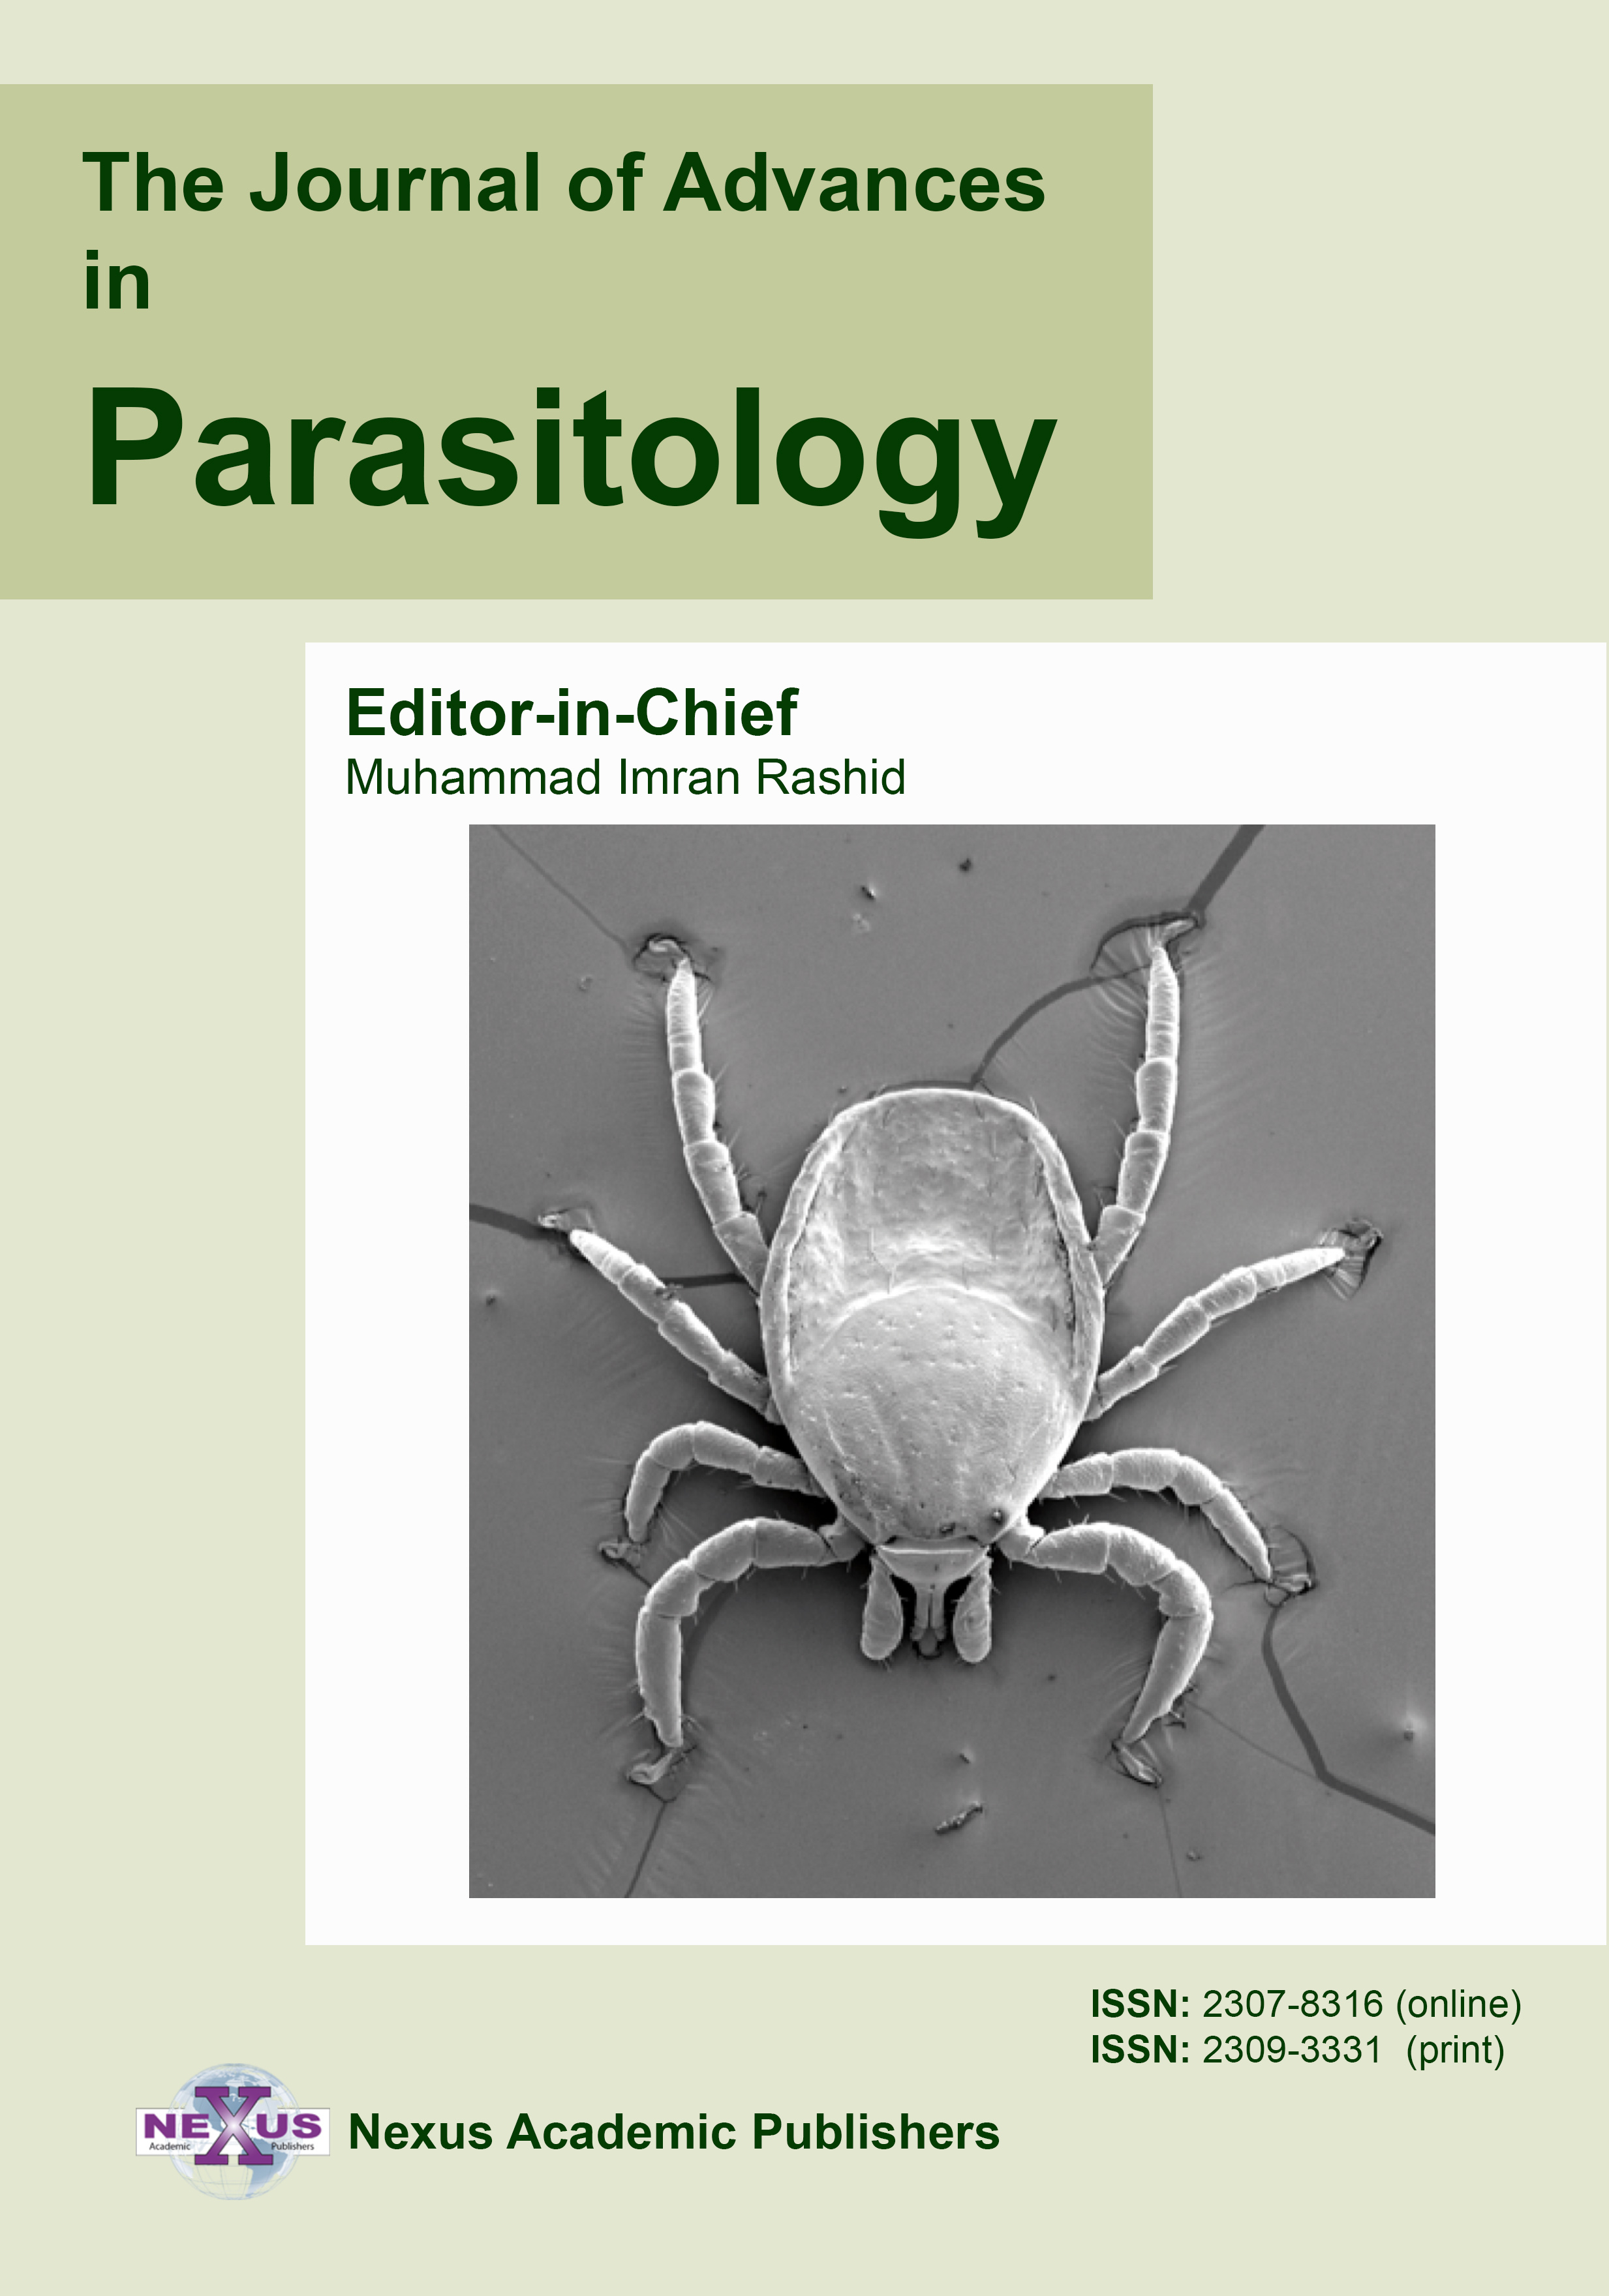 The Journal of Advances in Parasitology